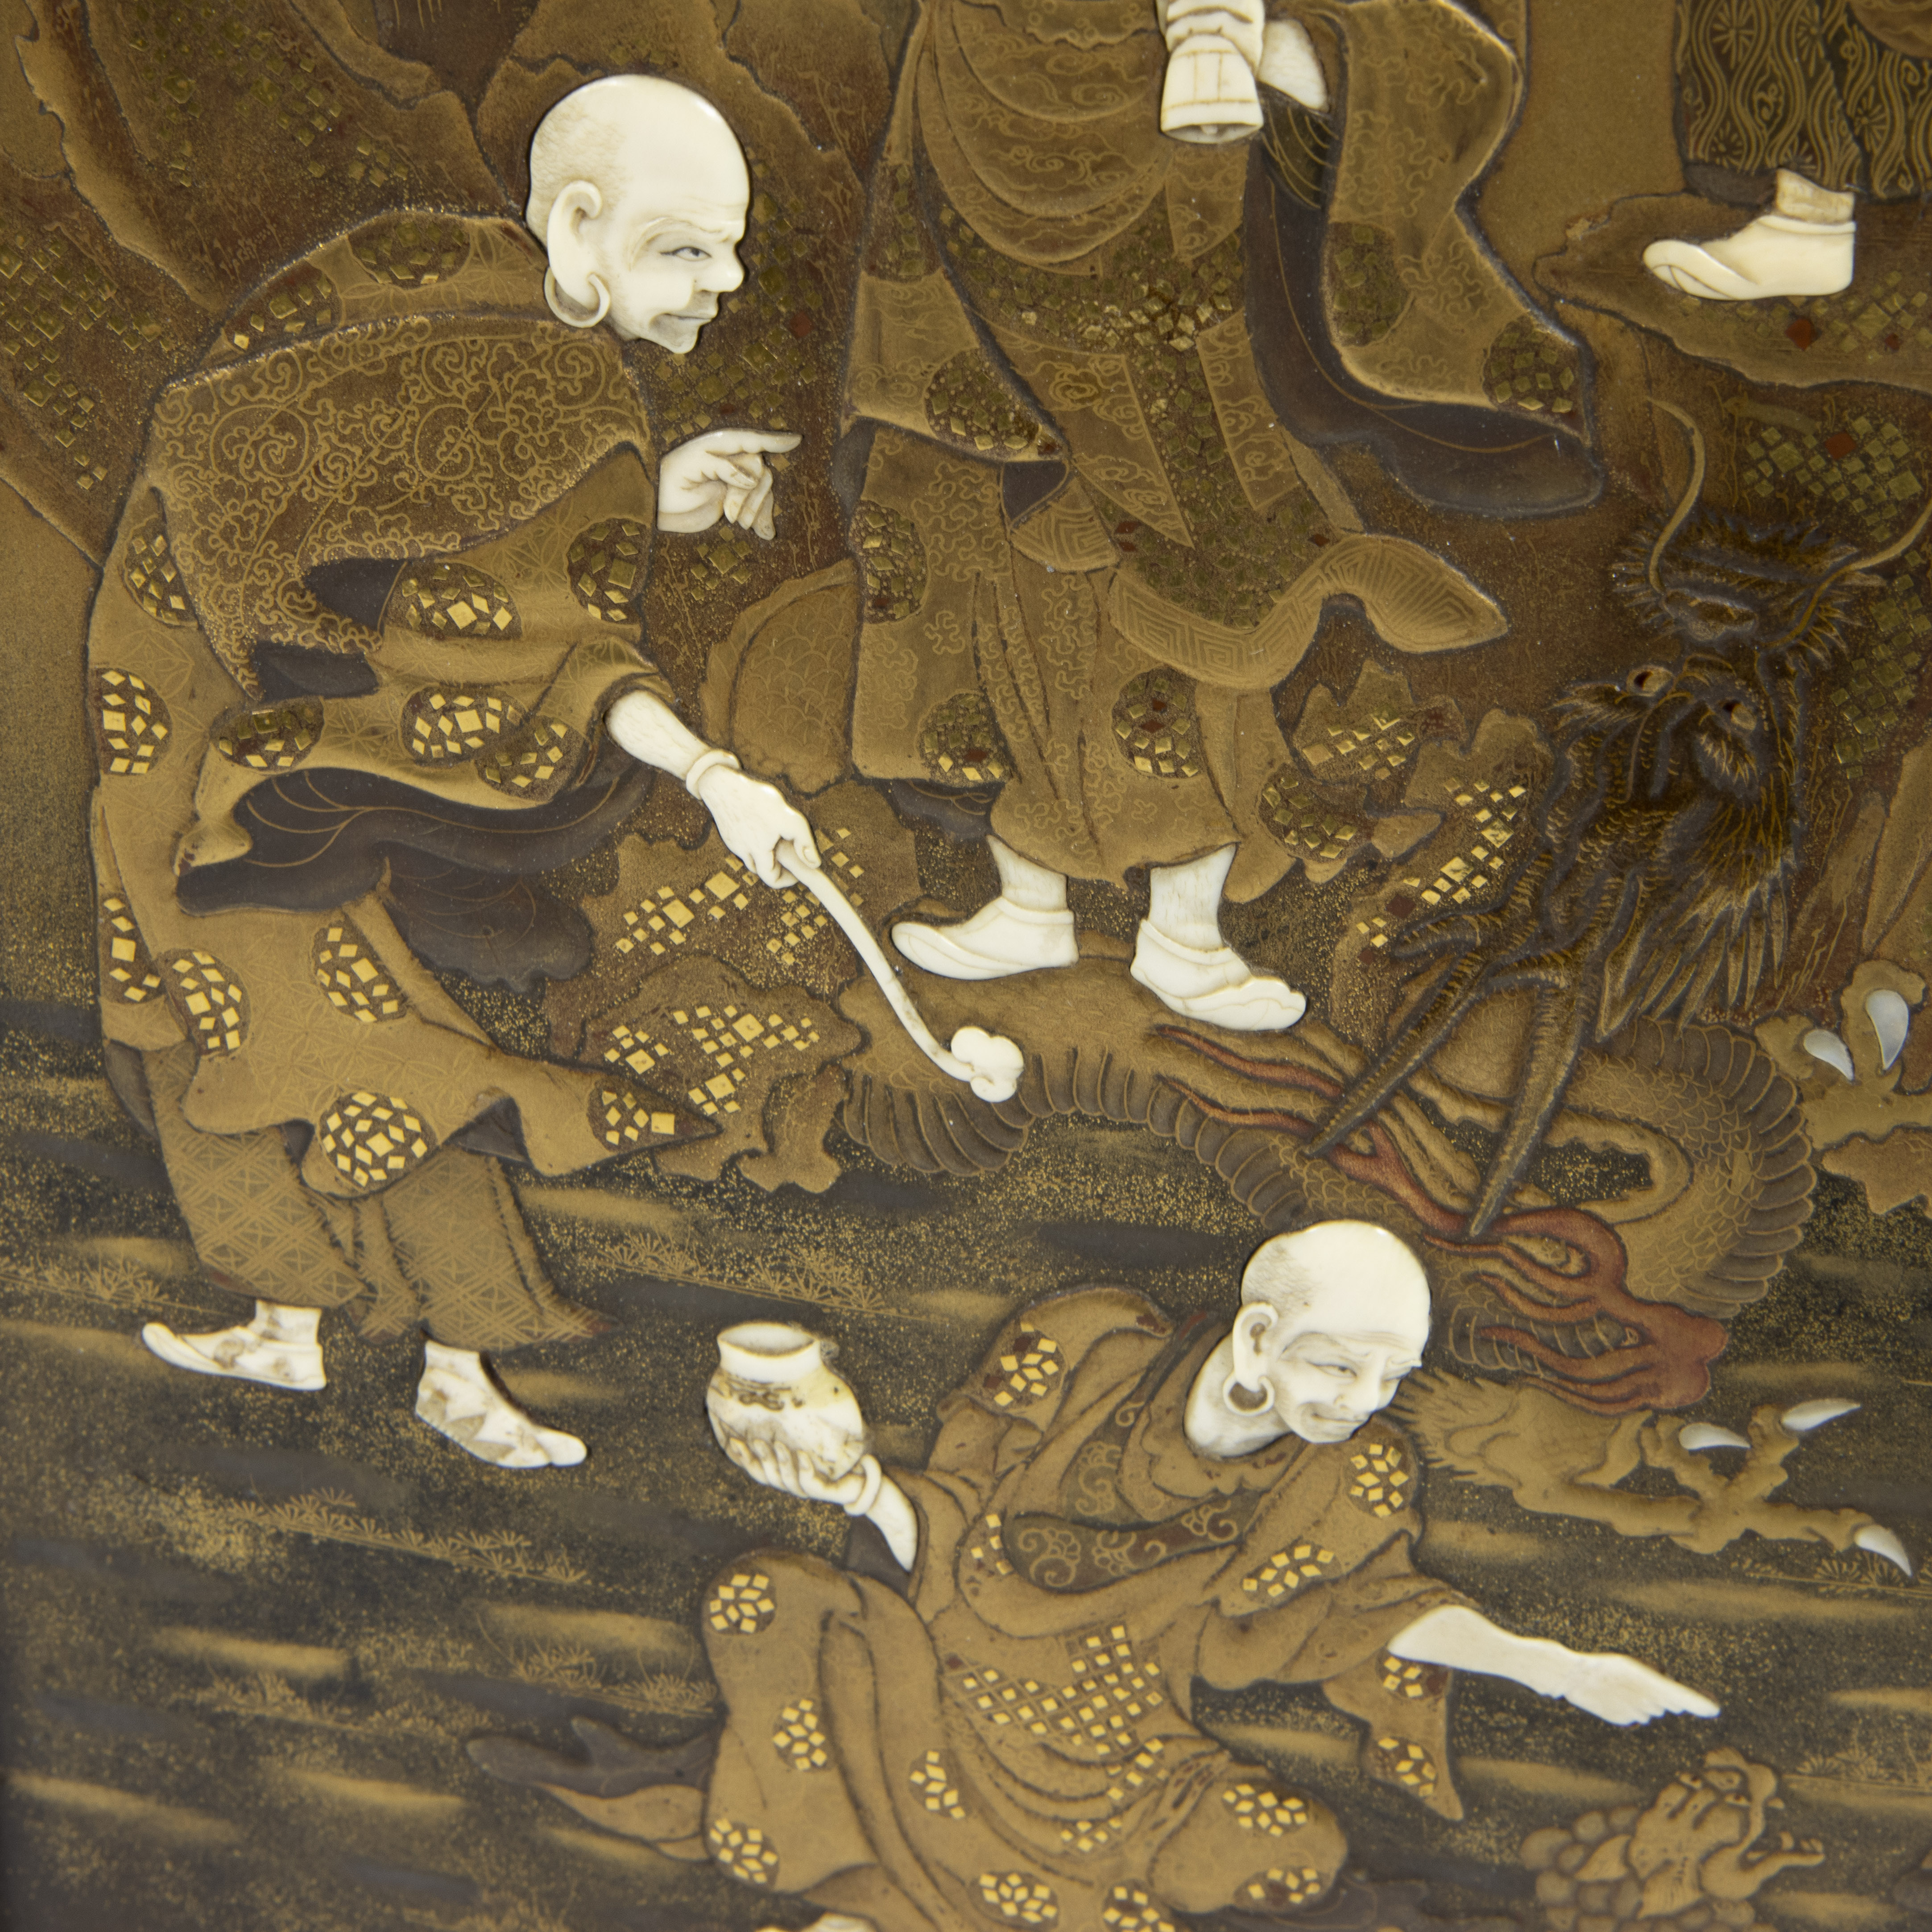 Lacquer cabinet door panel 19th century depicting 7 sage Gods with ivory heads and arms, Japanese Im - Image 6 of 10